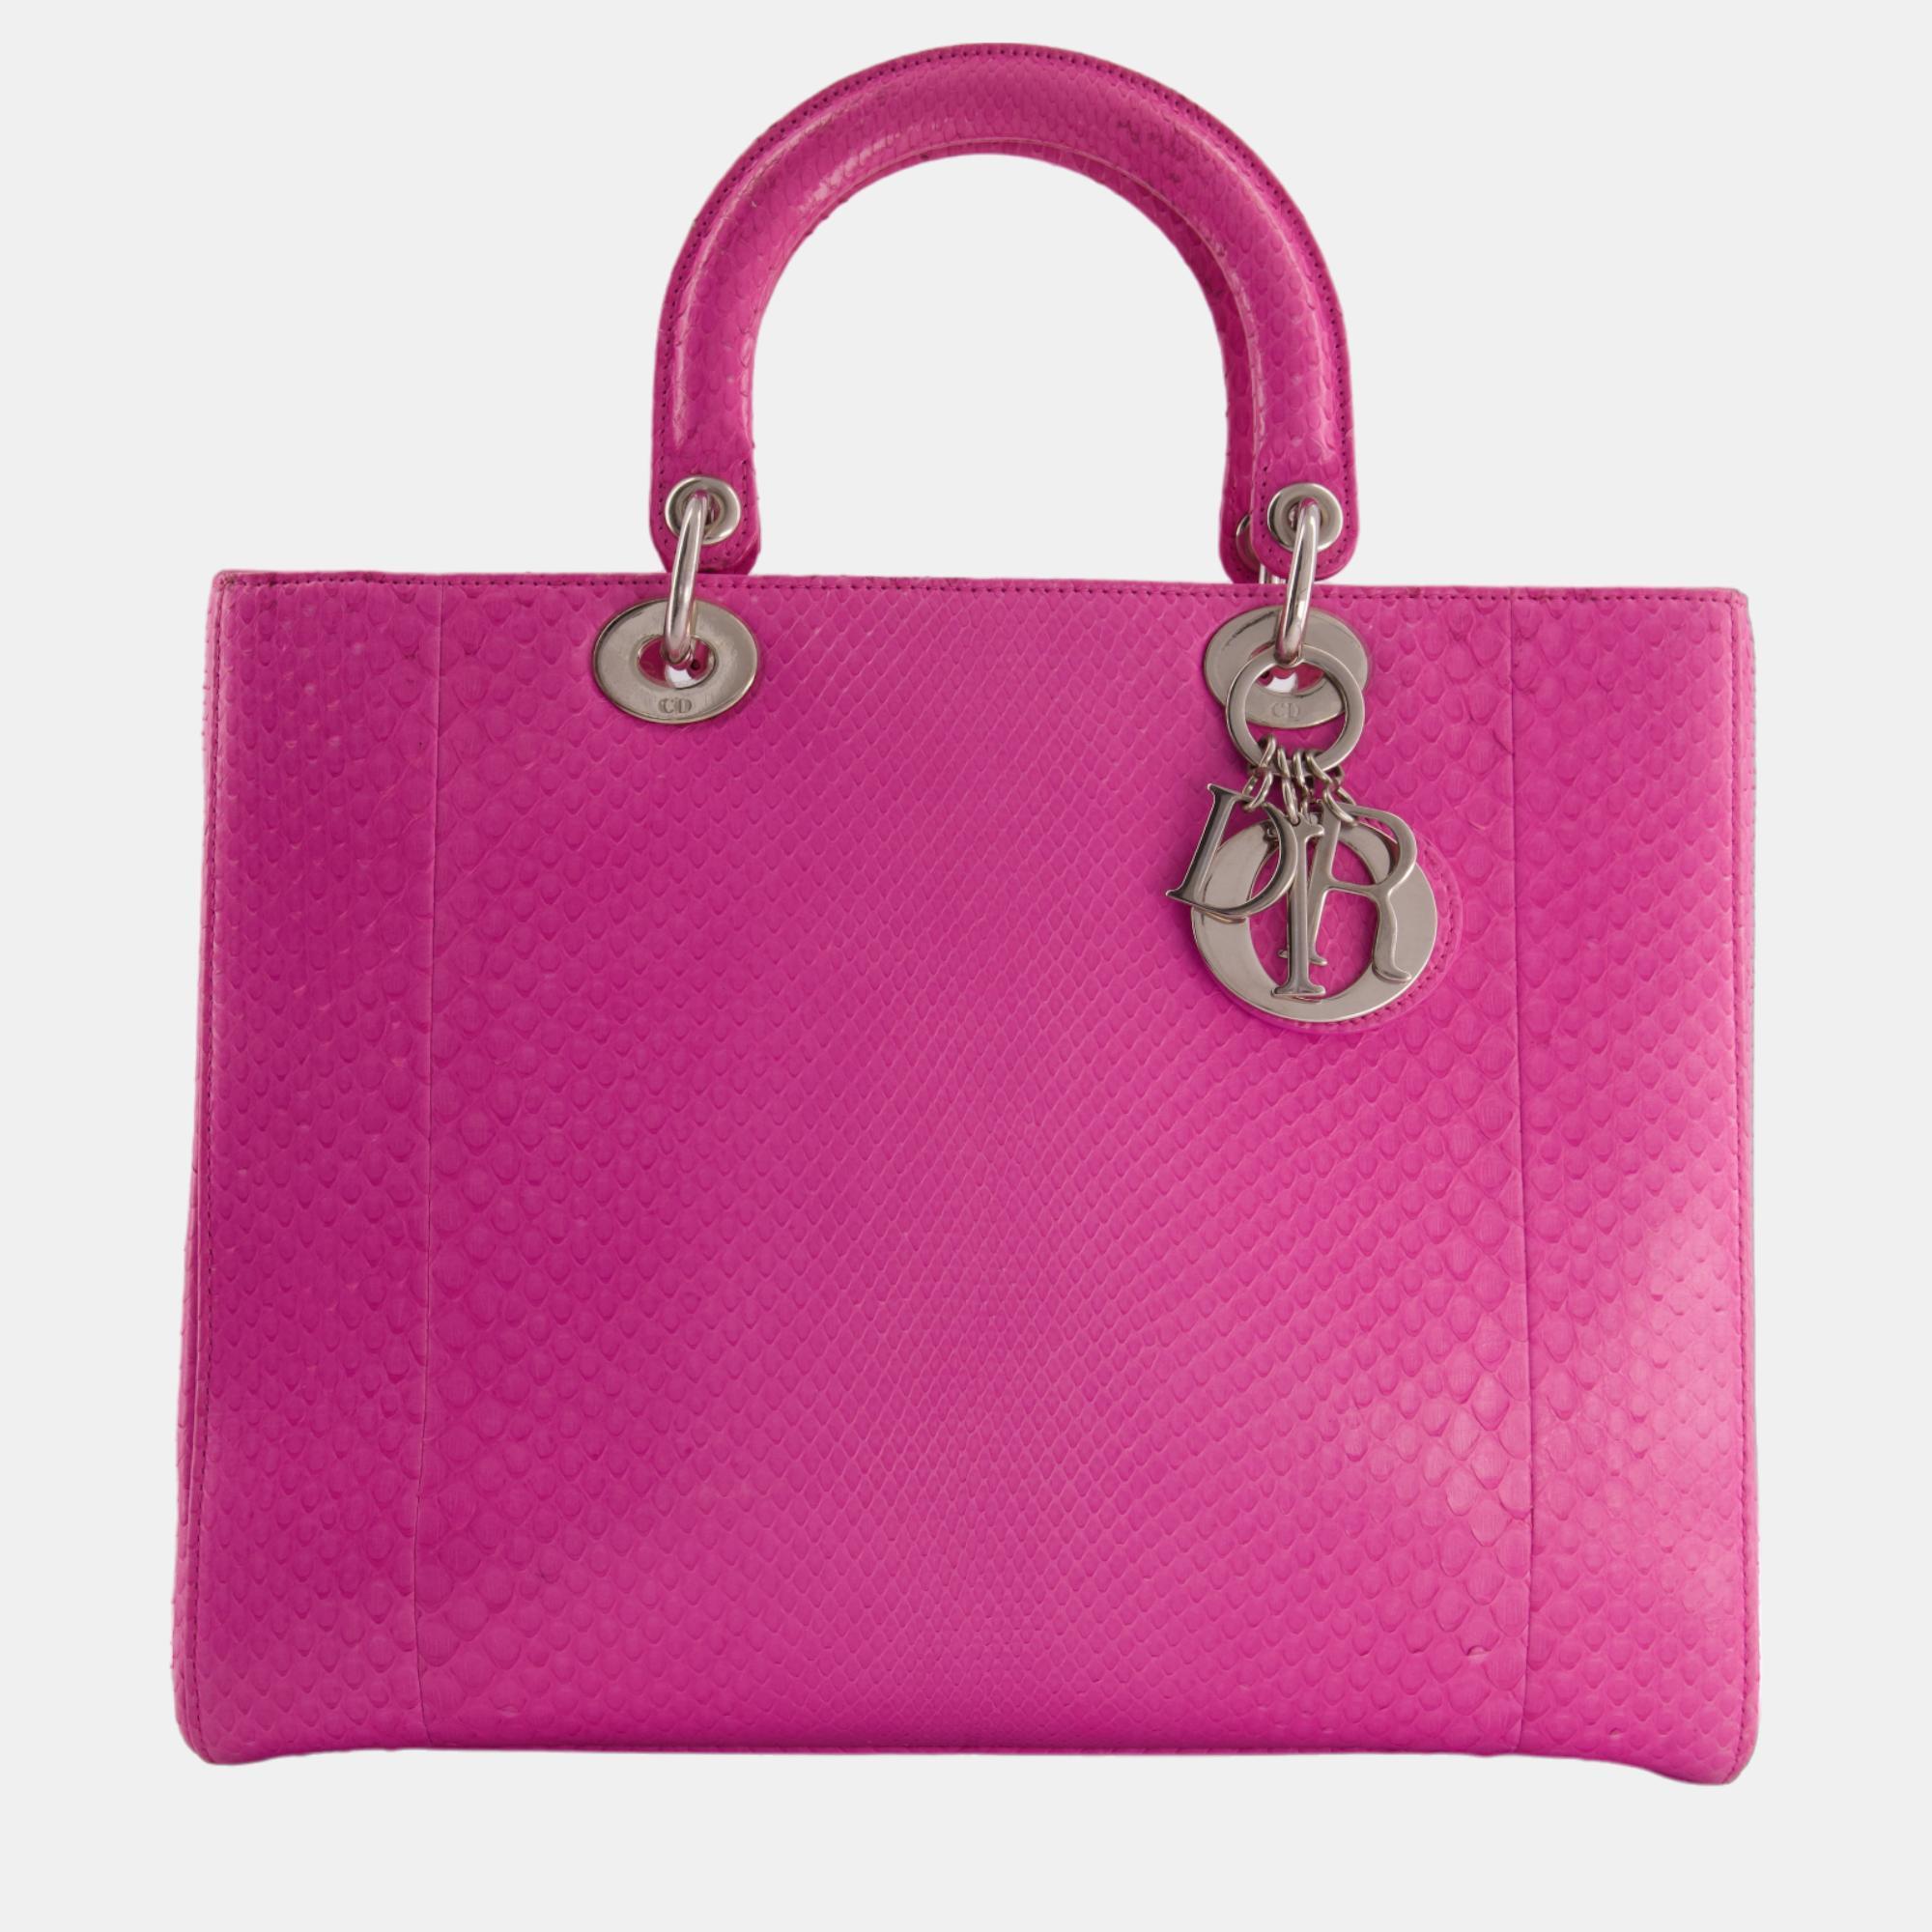 Christian Dior Large Pink Python Lady Dior Bag with Silver Hardware